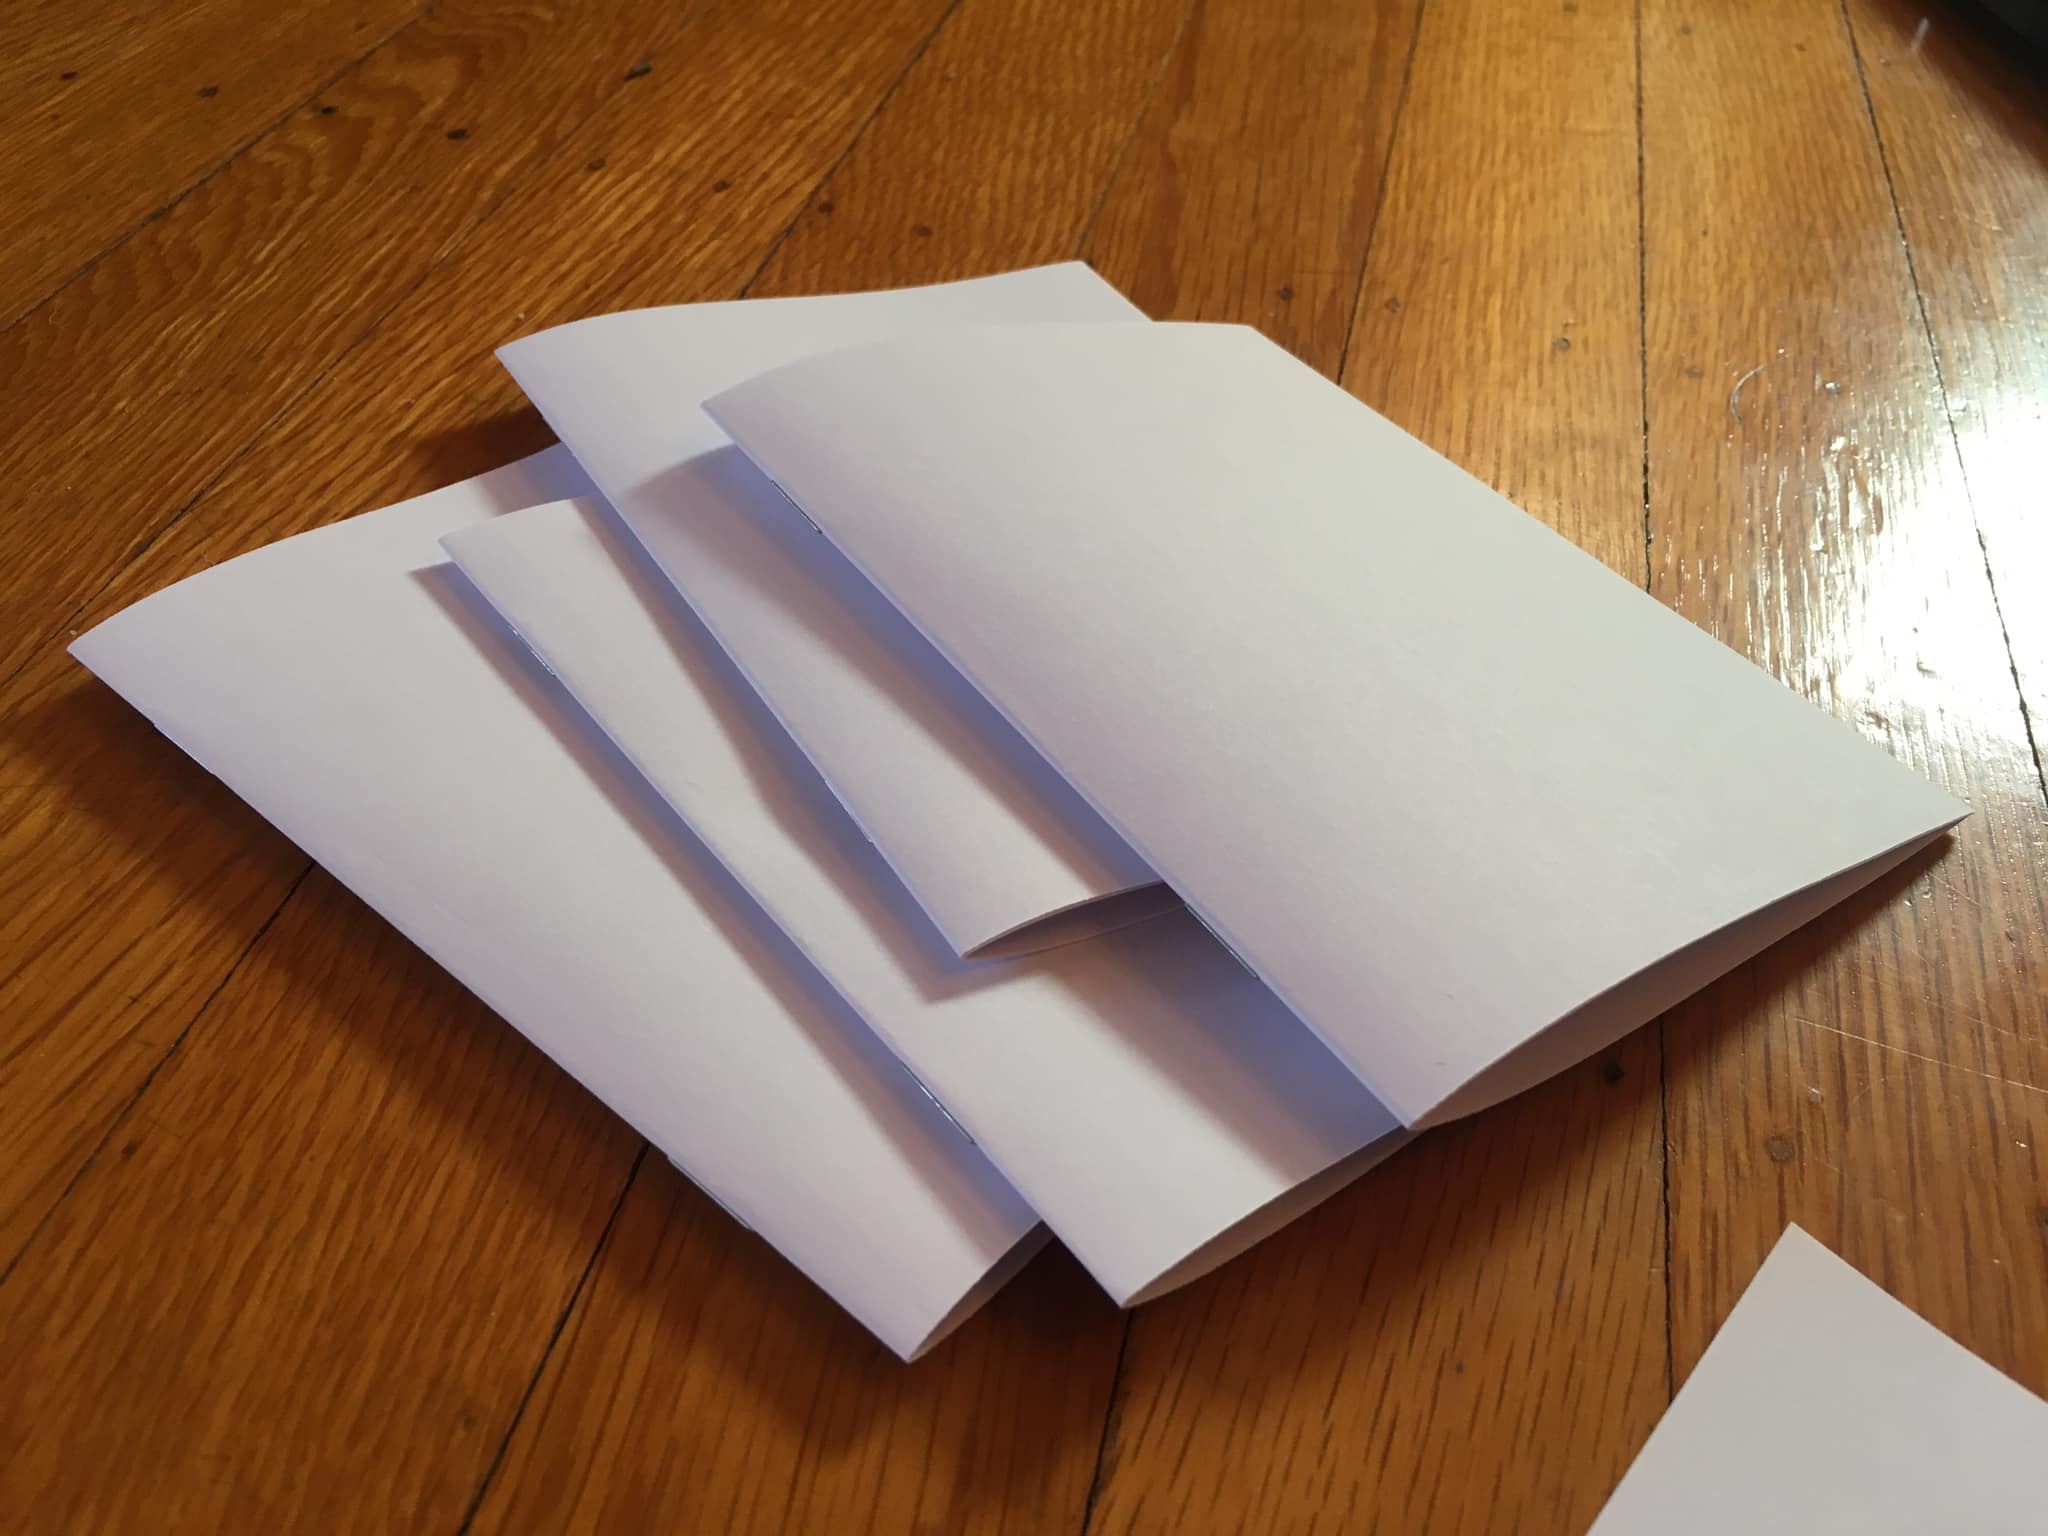 Blank paper booklets